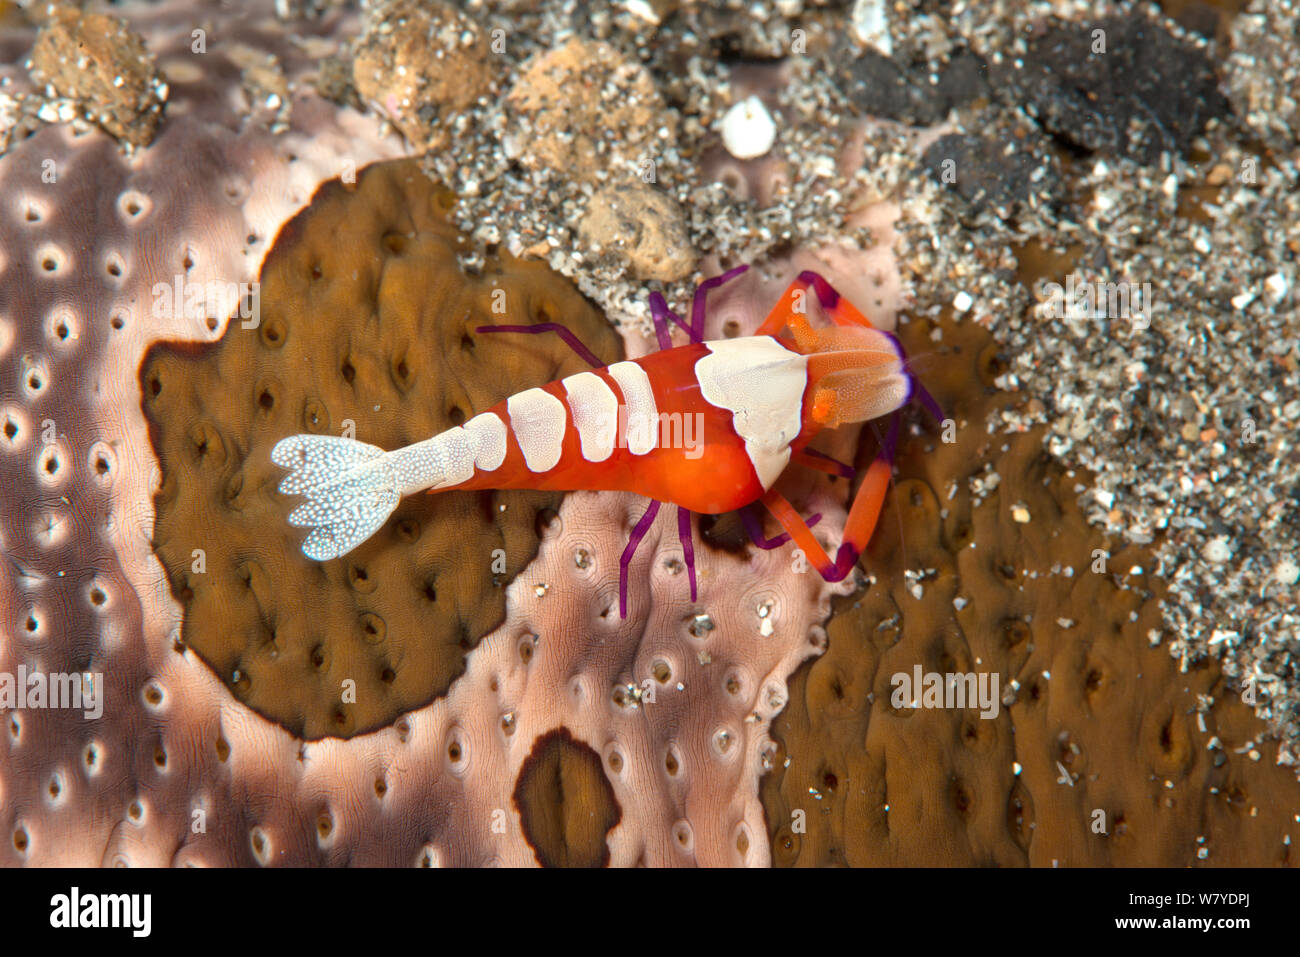 Emperor shrimp (Periclimenes imperator) with parasitic Isopod (Bopyridae) and living commensally with Leopard Sea Cucumber (Bohadschia argus) Lembeh Strait, North Sulawesi, Indonesia. Stock Photo